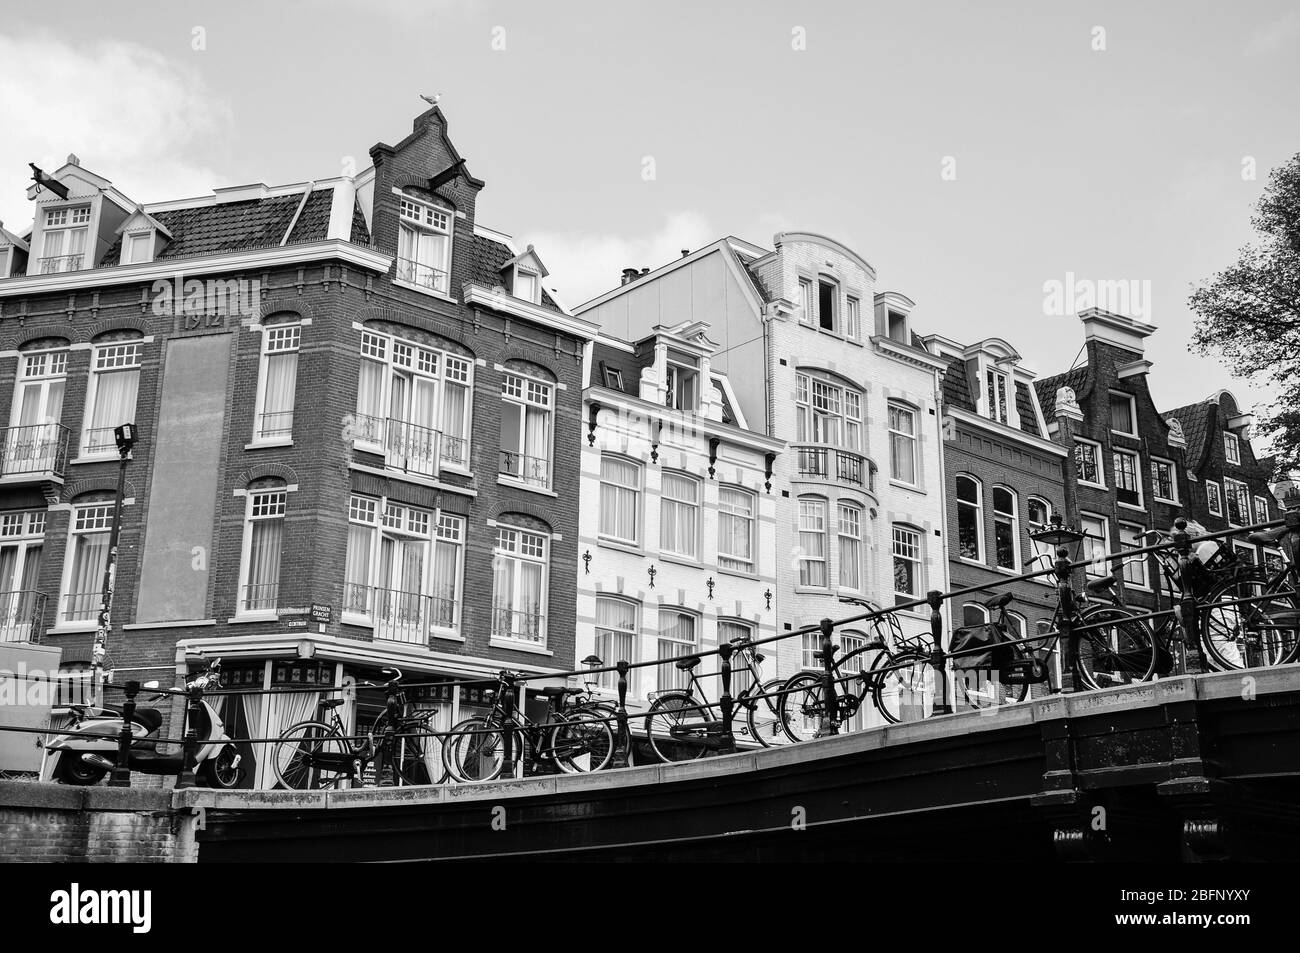 Canals of Amsterdam Stock Photo